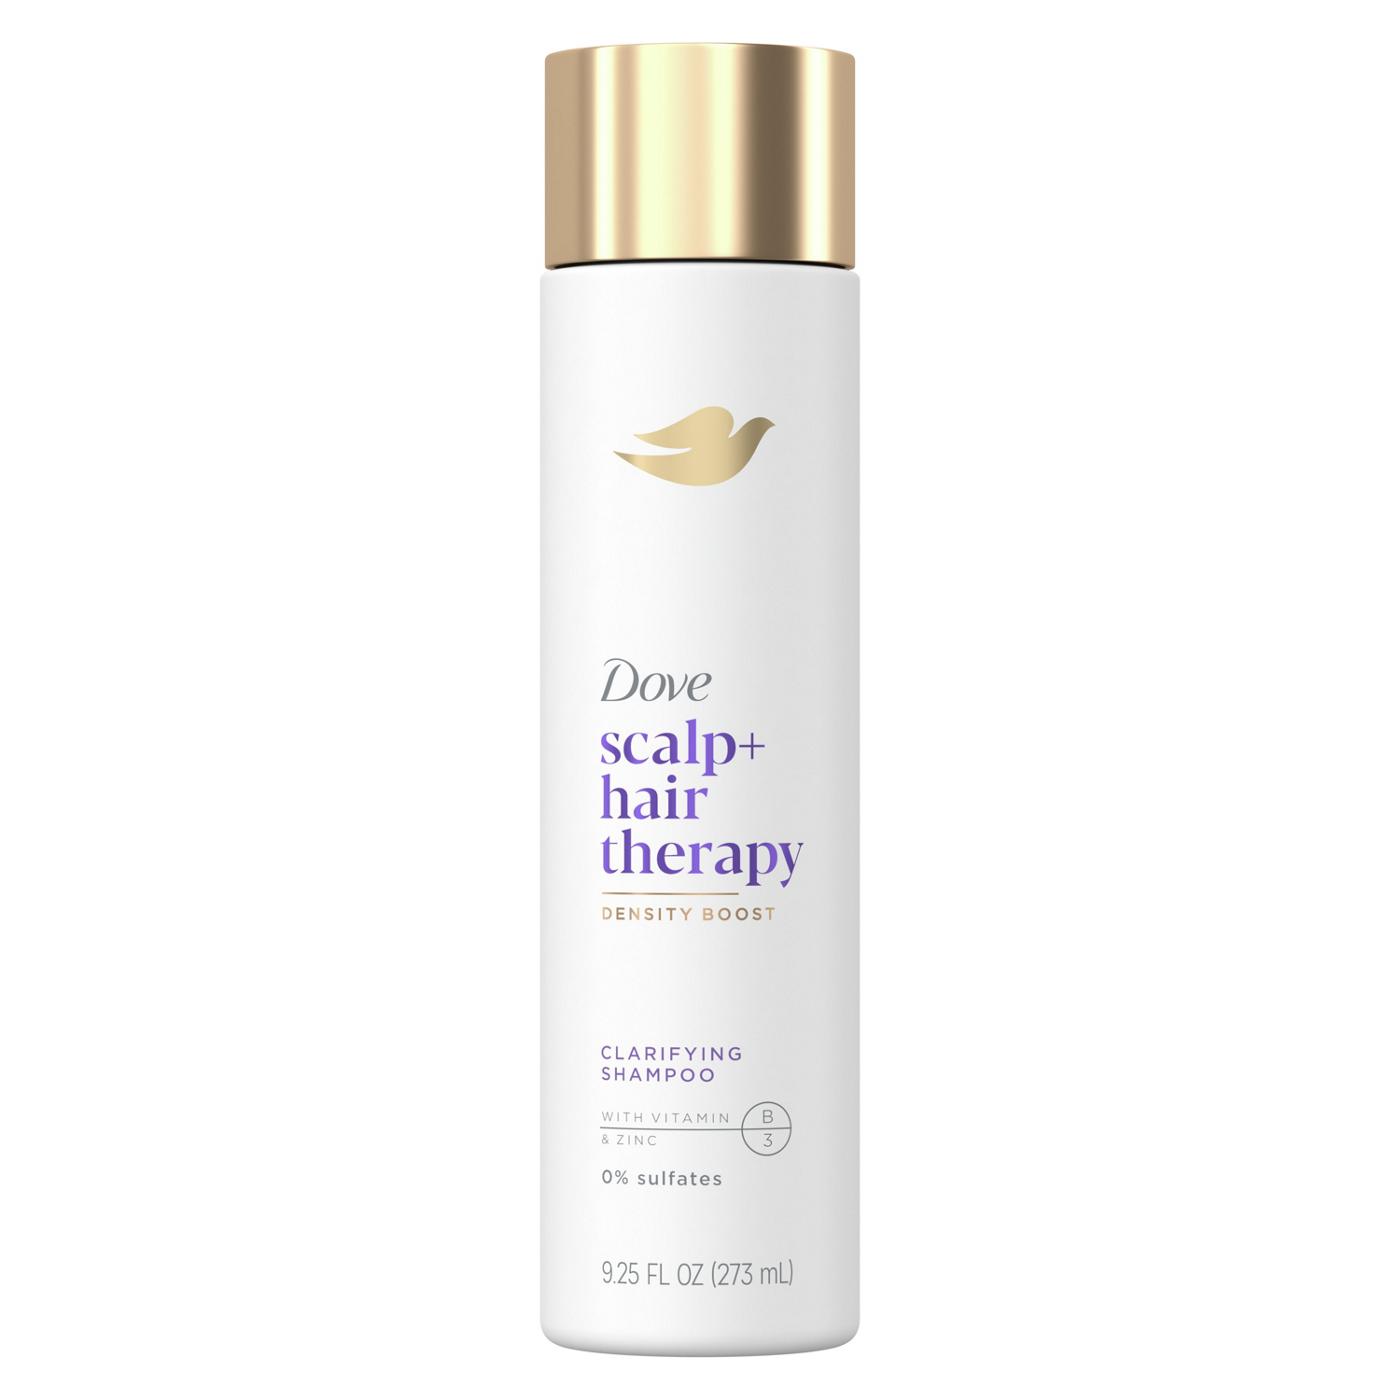 Dove Scalp+ Hair Therapy Clarifying Shampoo; image 1 of 4